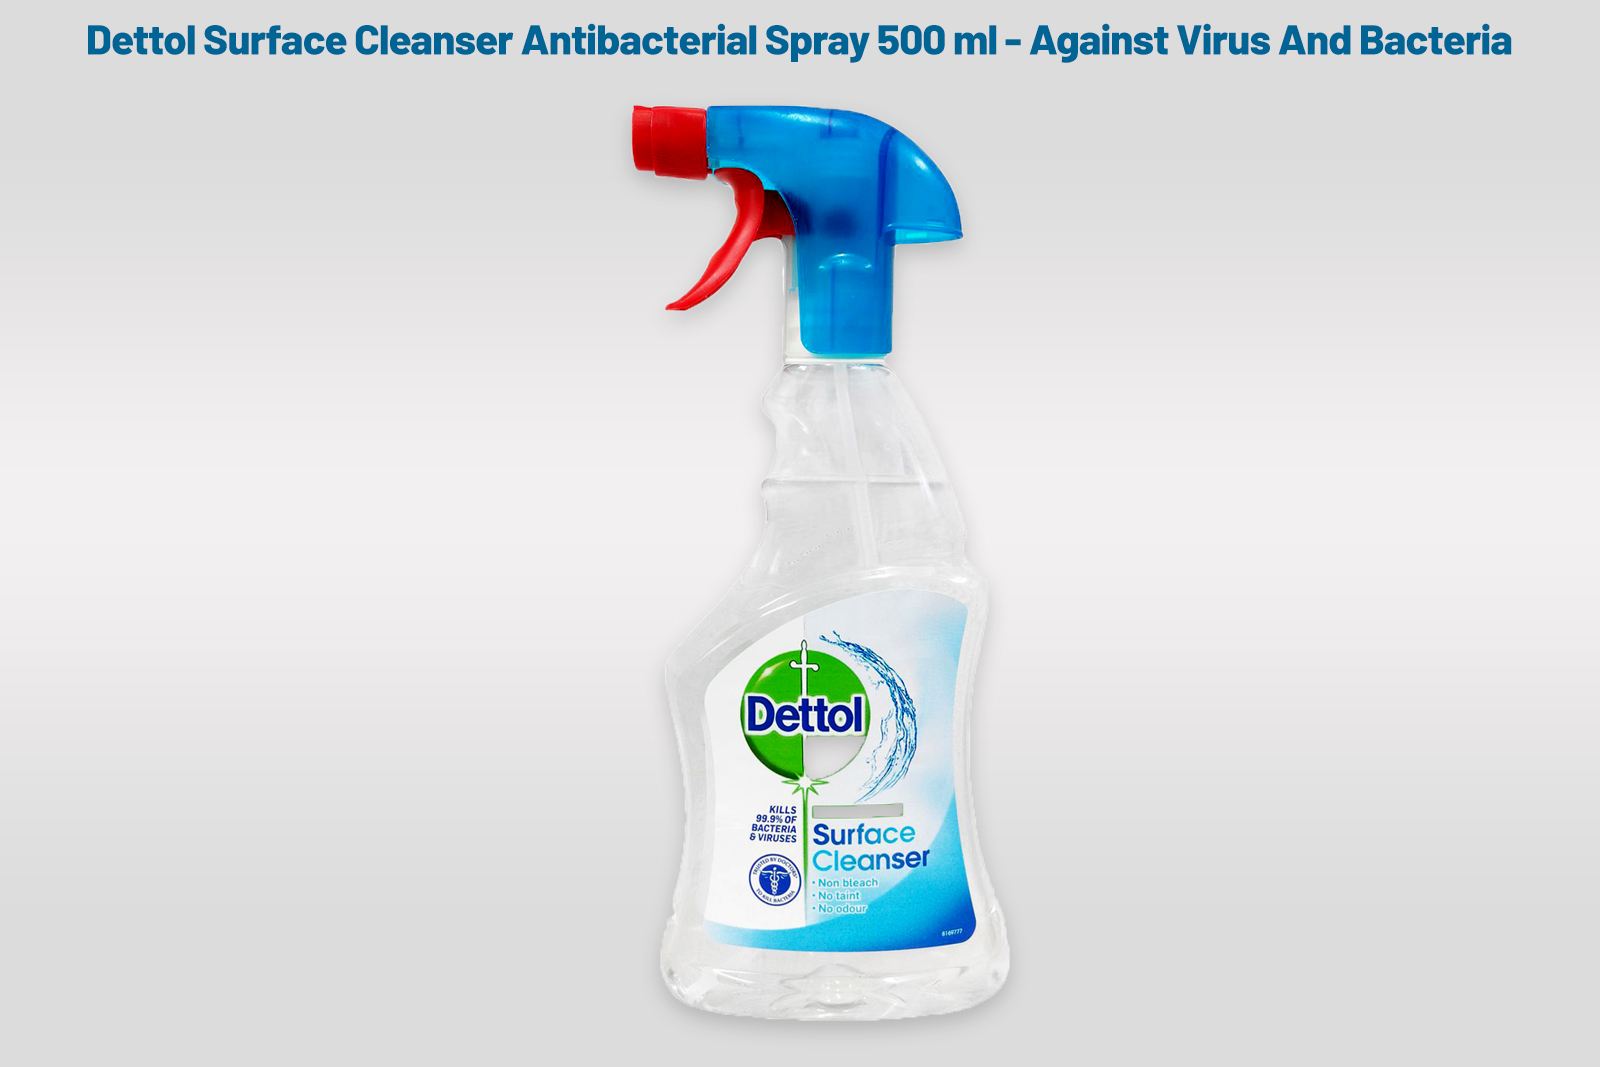 Dettol Surface Cleanser Antibacterial Spray 500 ml - Against Virus And Bacteria